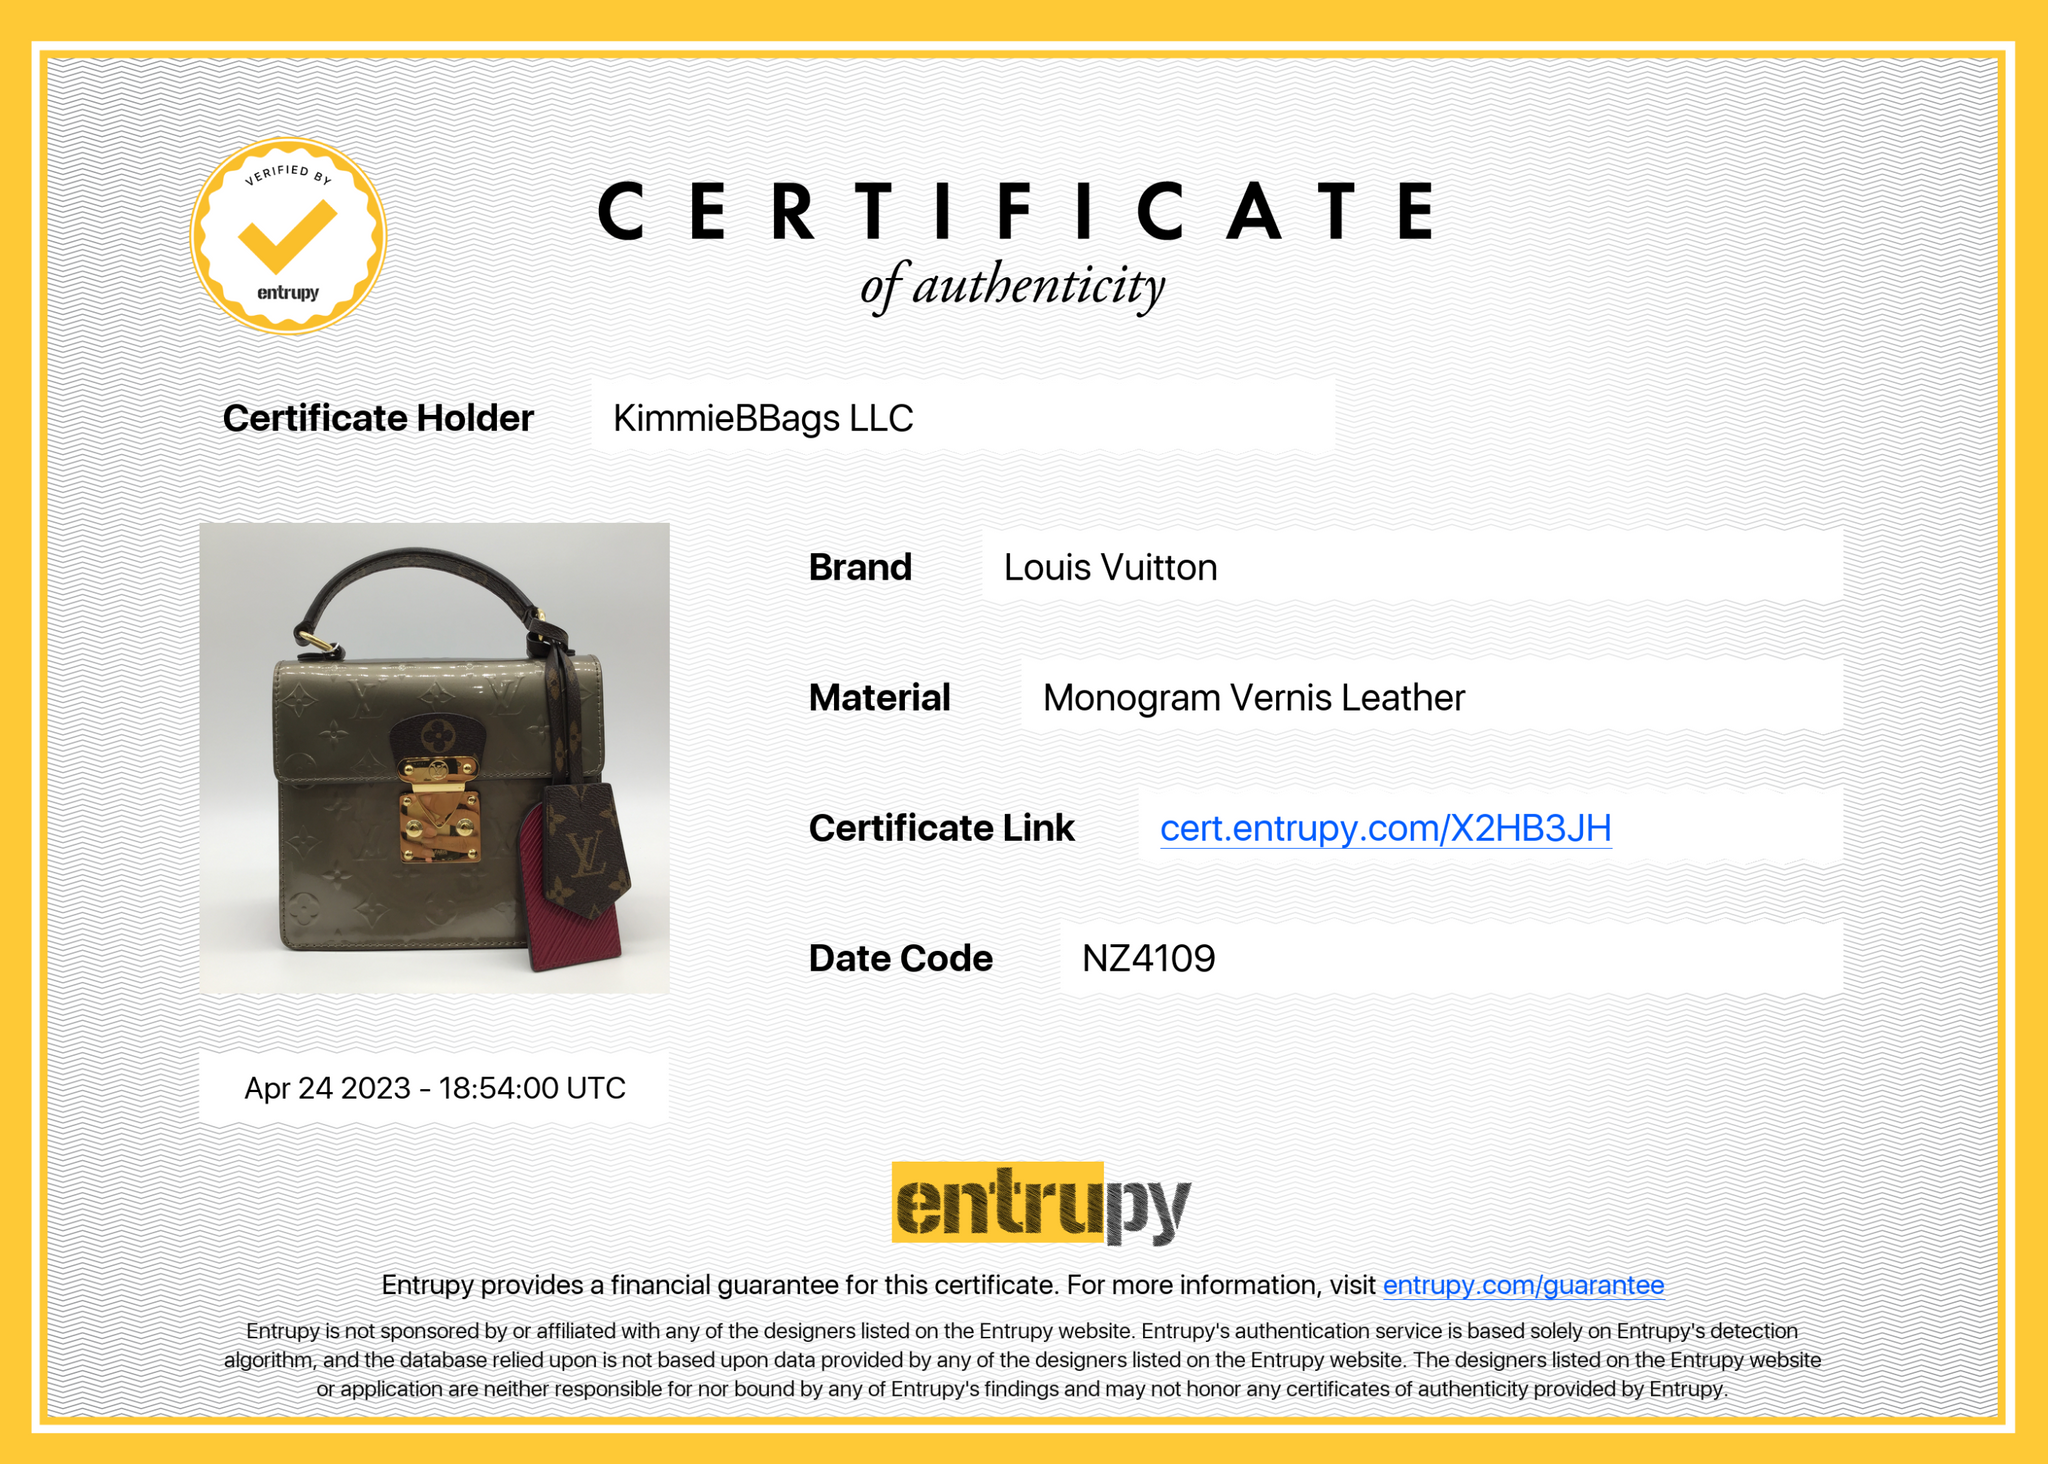 Louis Vuitton Vernis Spring Street Hand Bag Yellow Patent leather